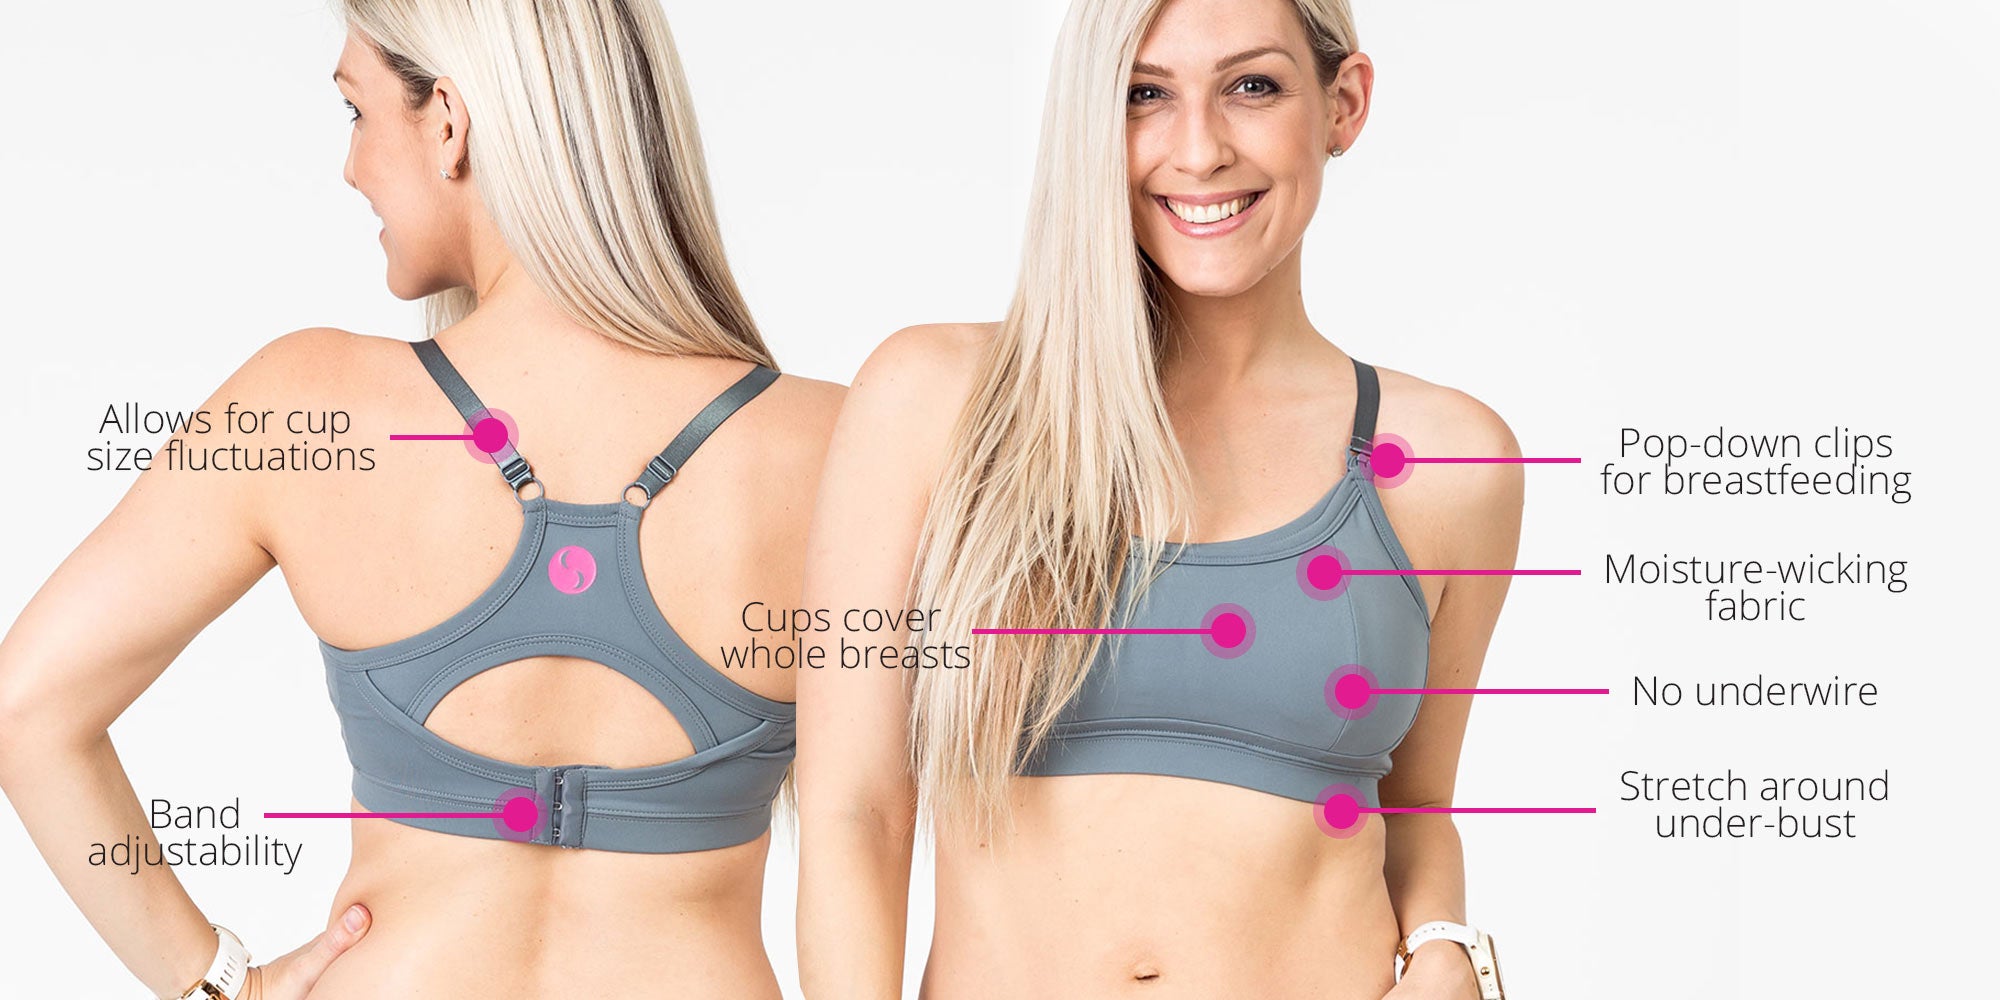 How to choose the best sports bra